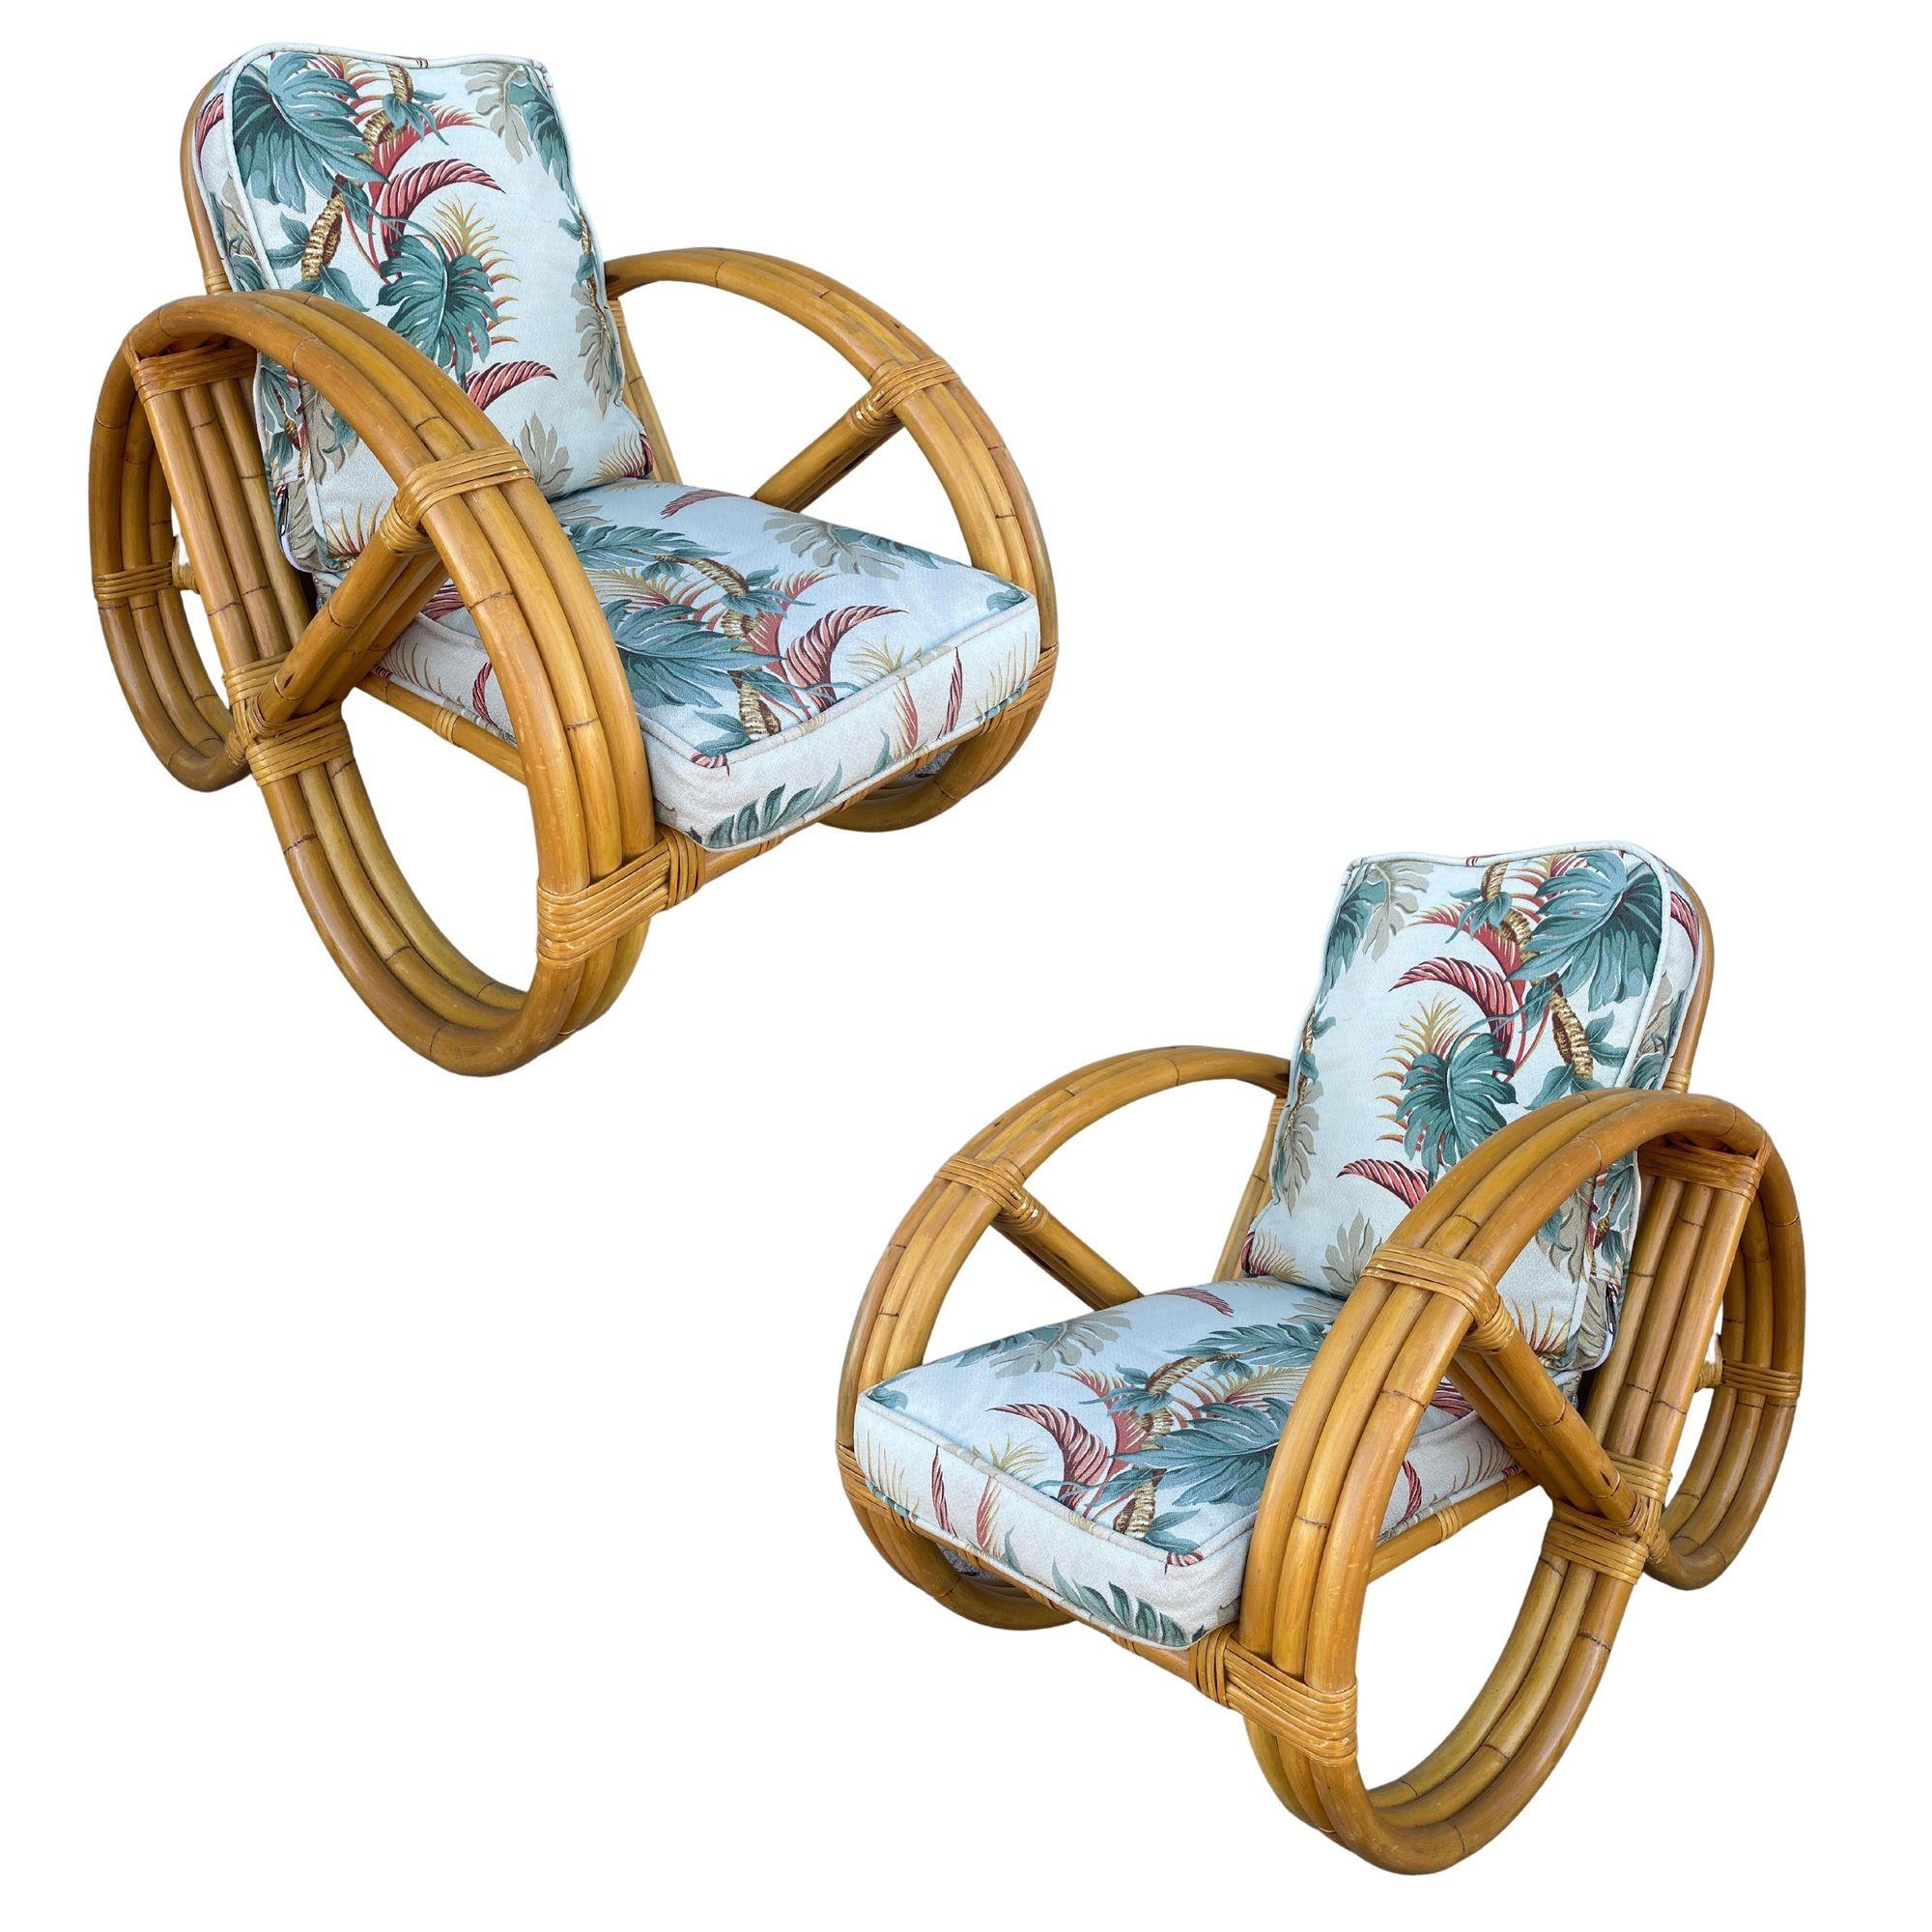 Rare three-strand round full pretzel arm rattan living room set featuring a pair of lounge chairs and a settee with fancy wicker wrappings.

Chairs: 23